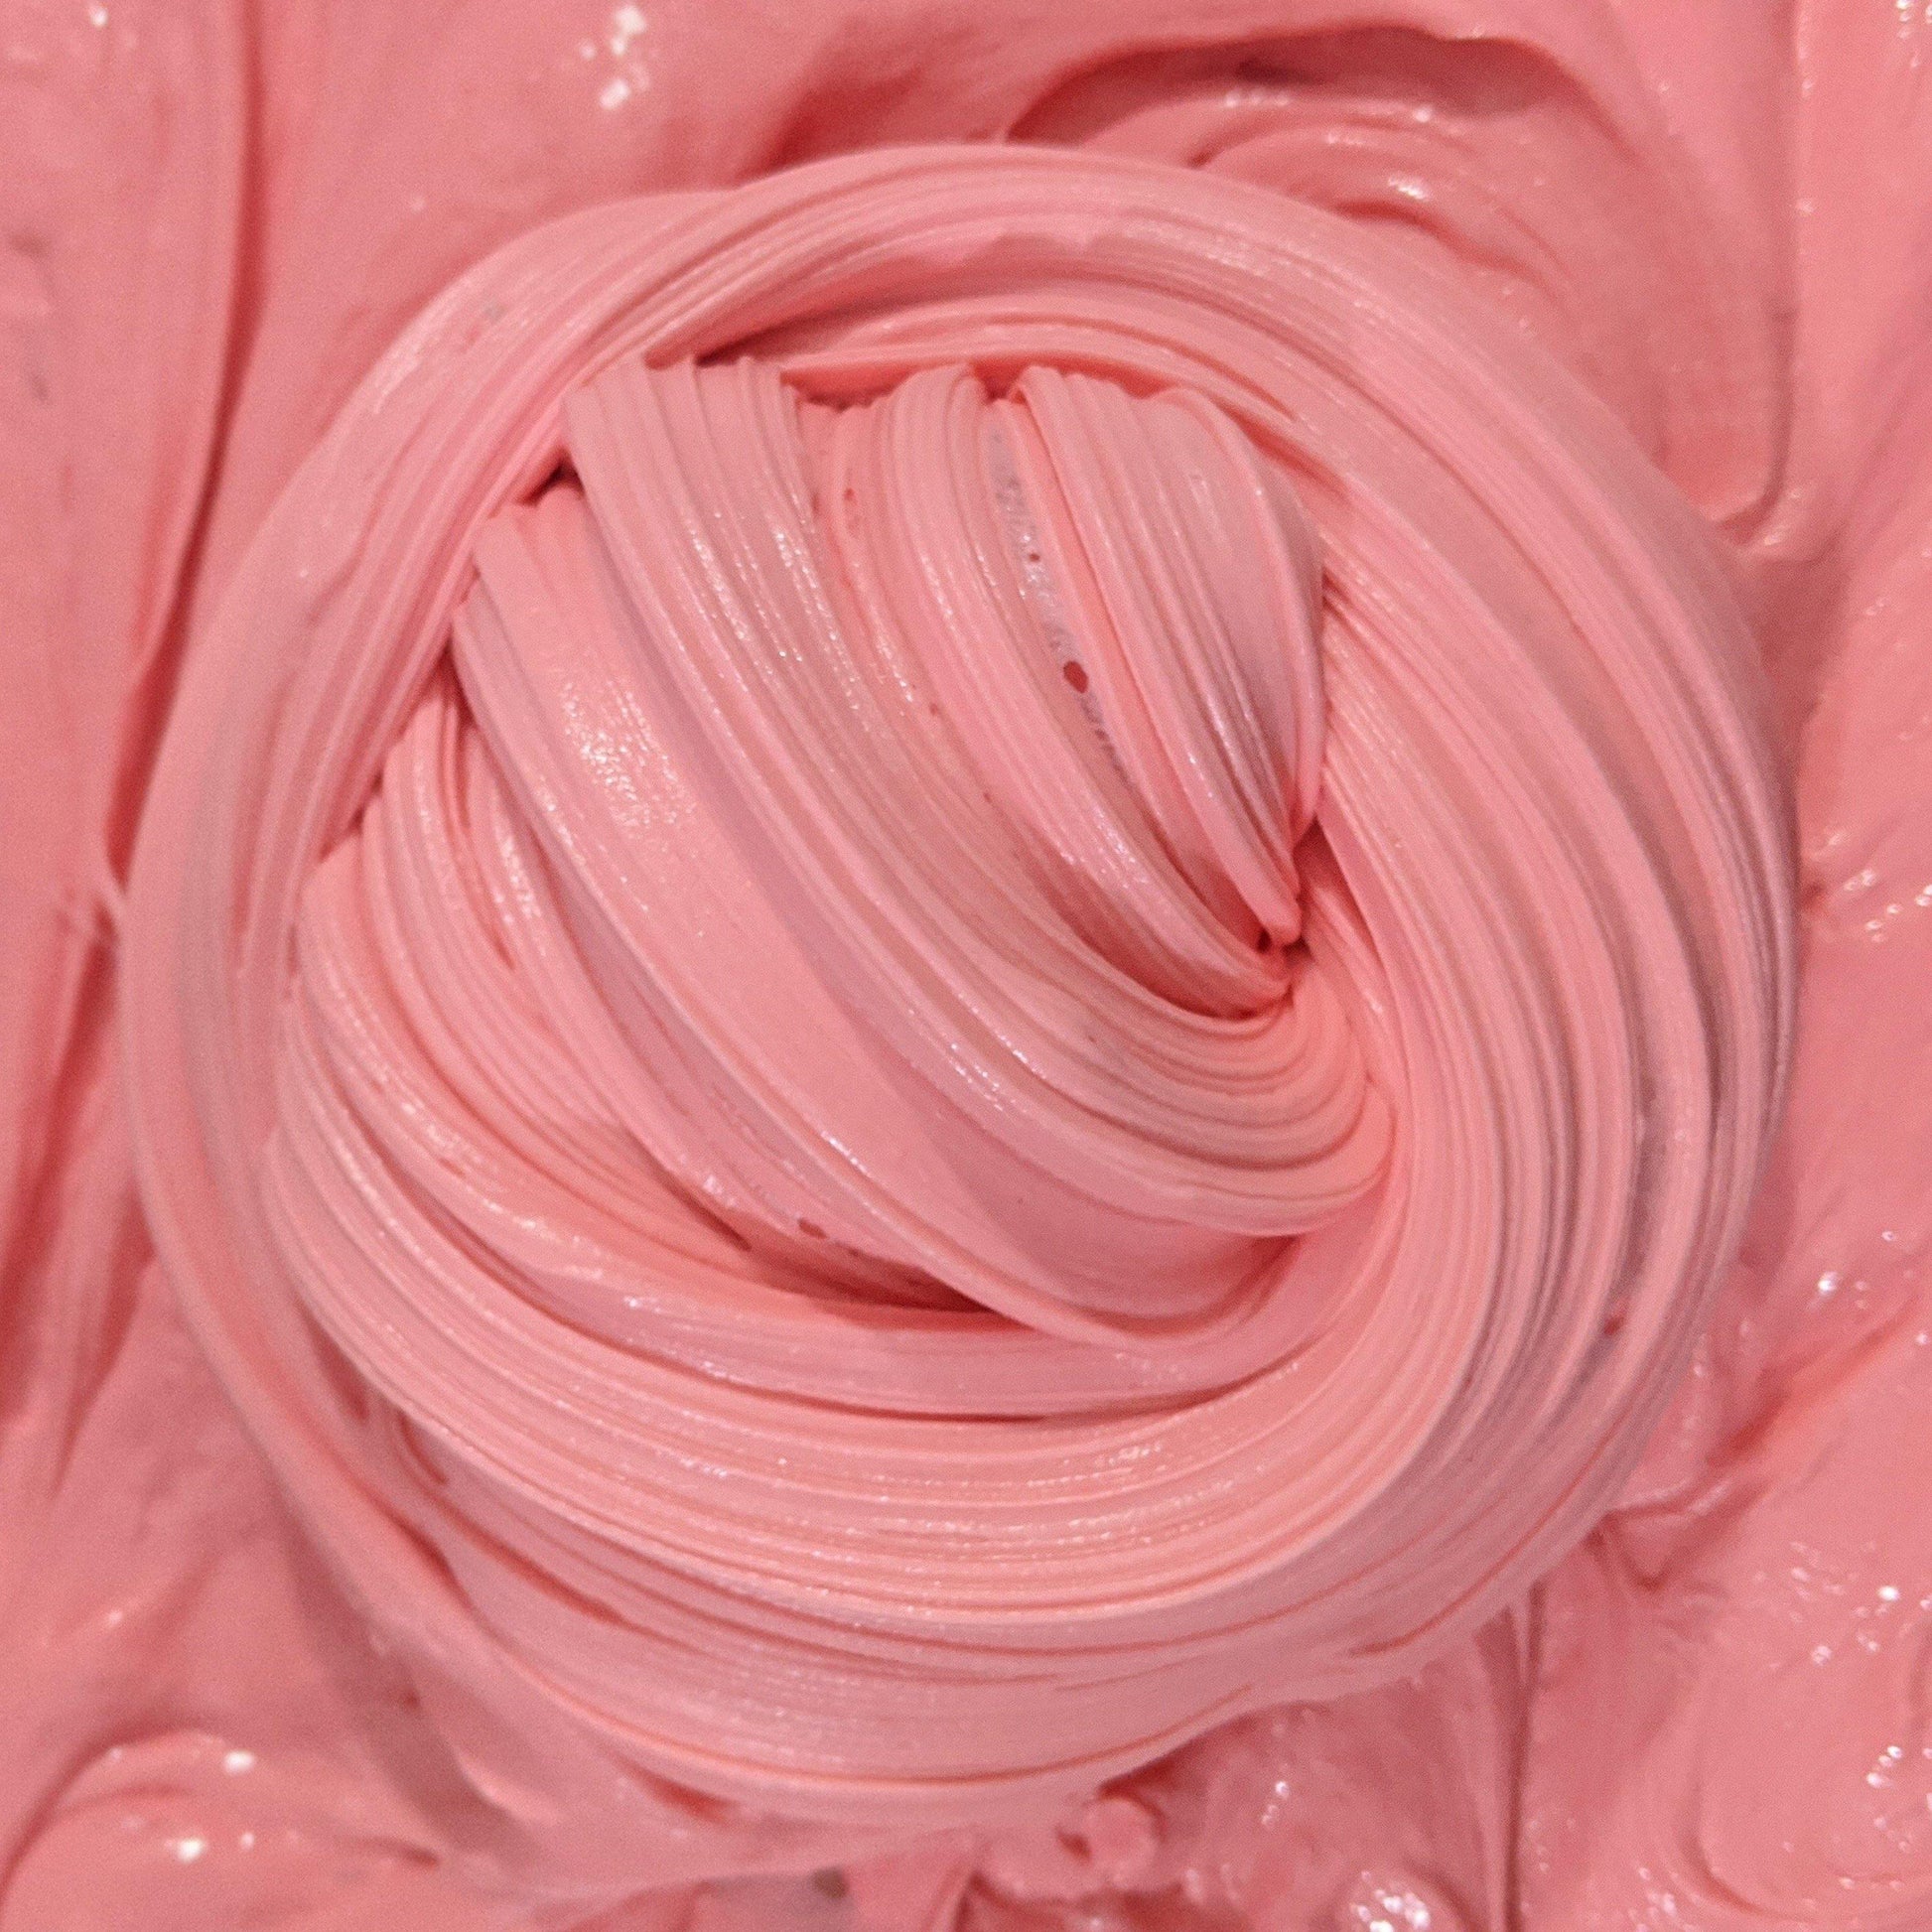 Strawberry scented butter slime - lil Shizz